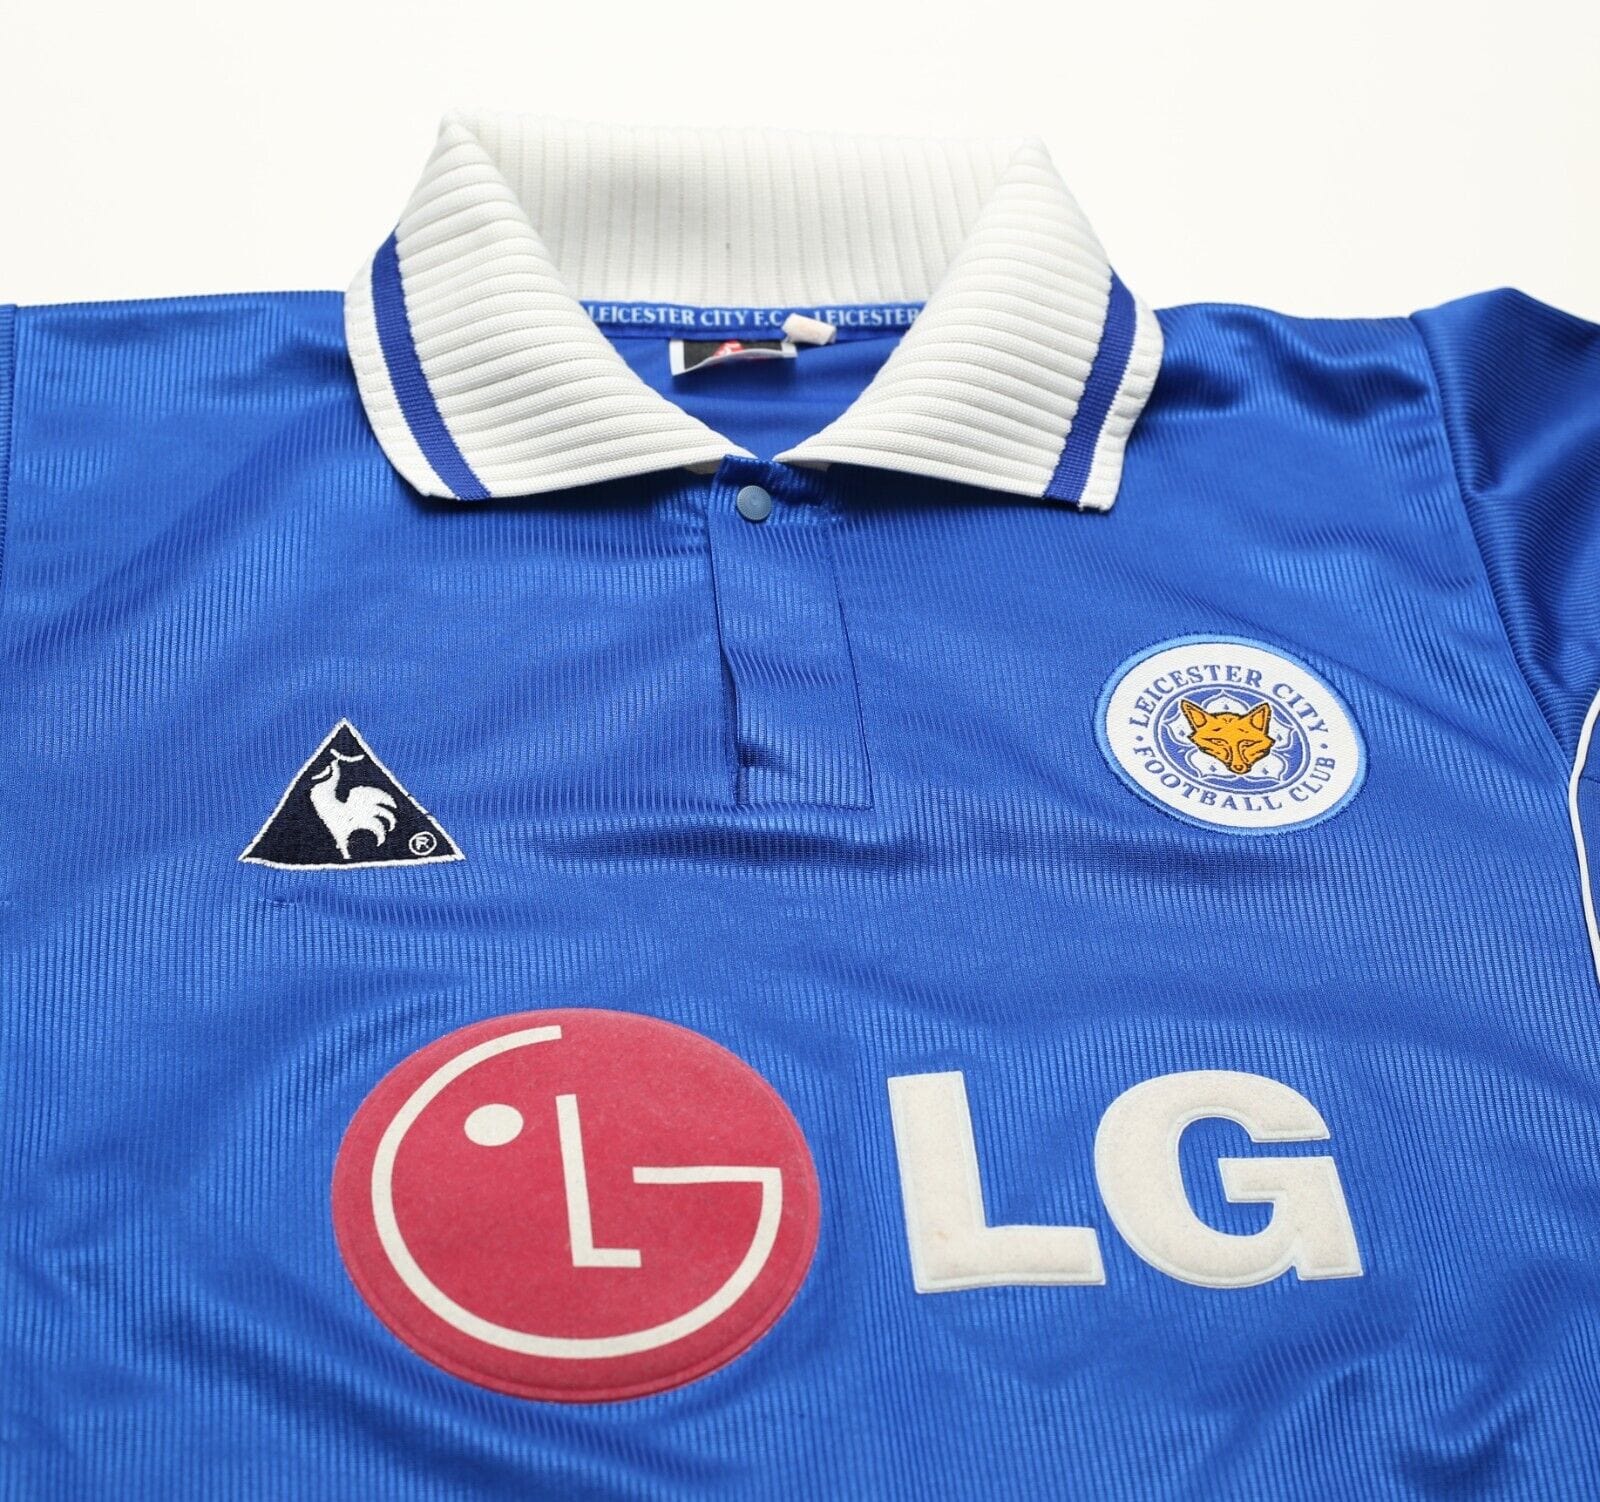 2001/02 SAVAGE #8 Leicester City Vintage LCS Home Football Shirt (M)